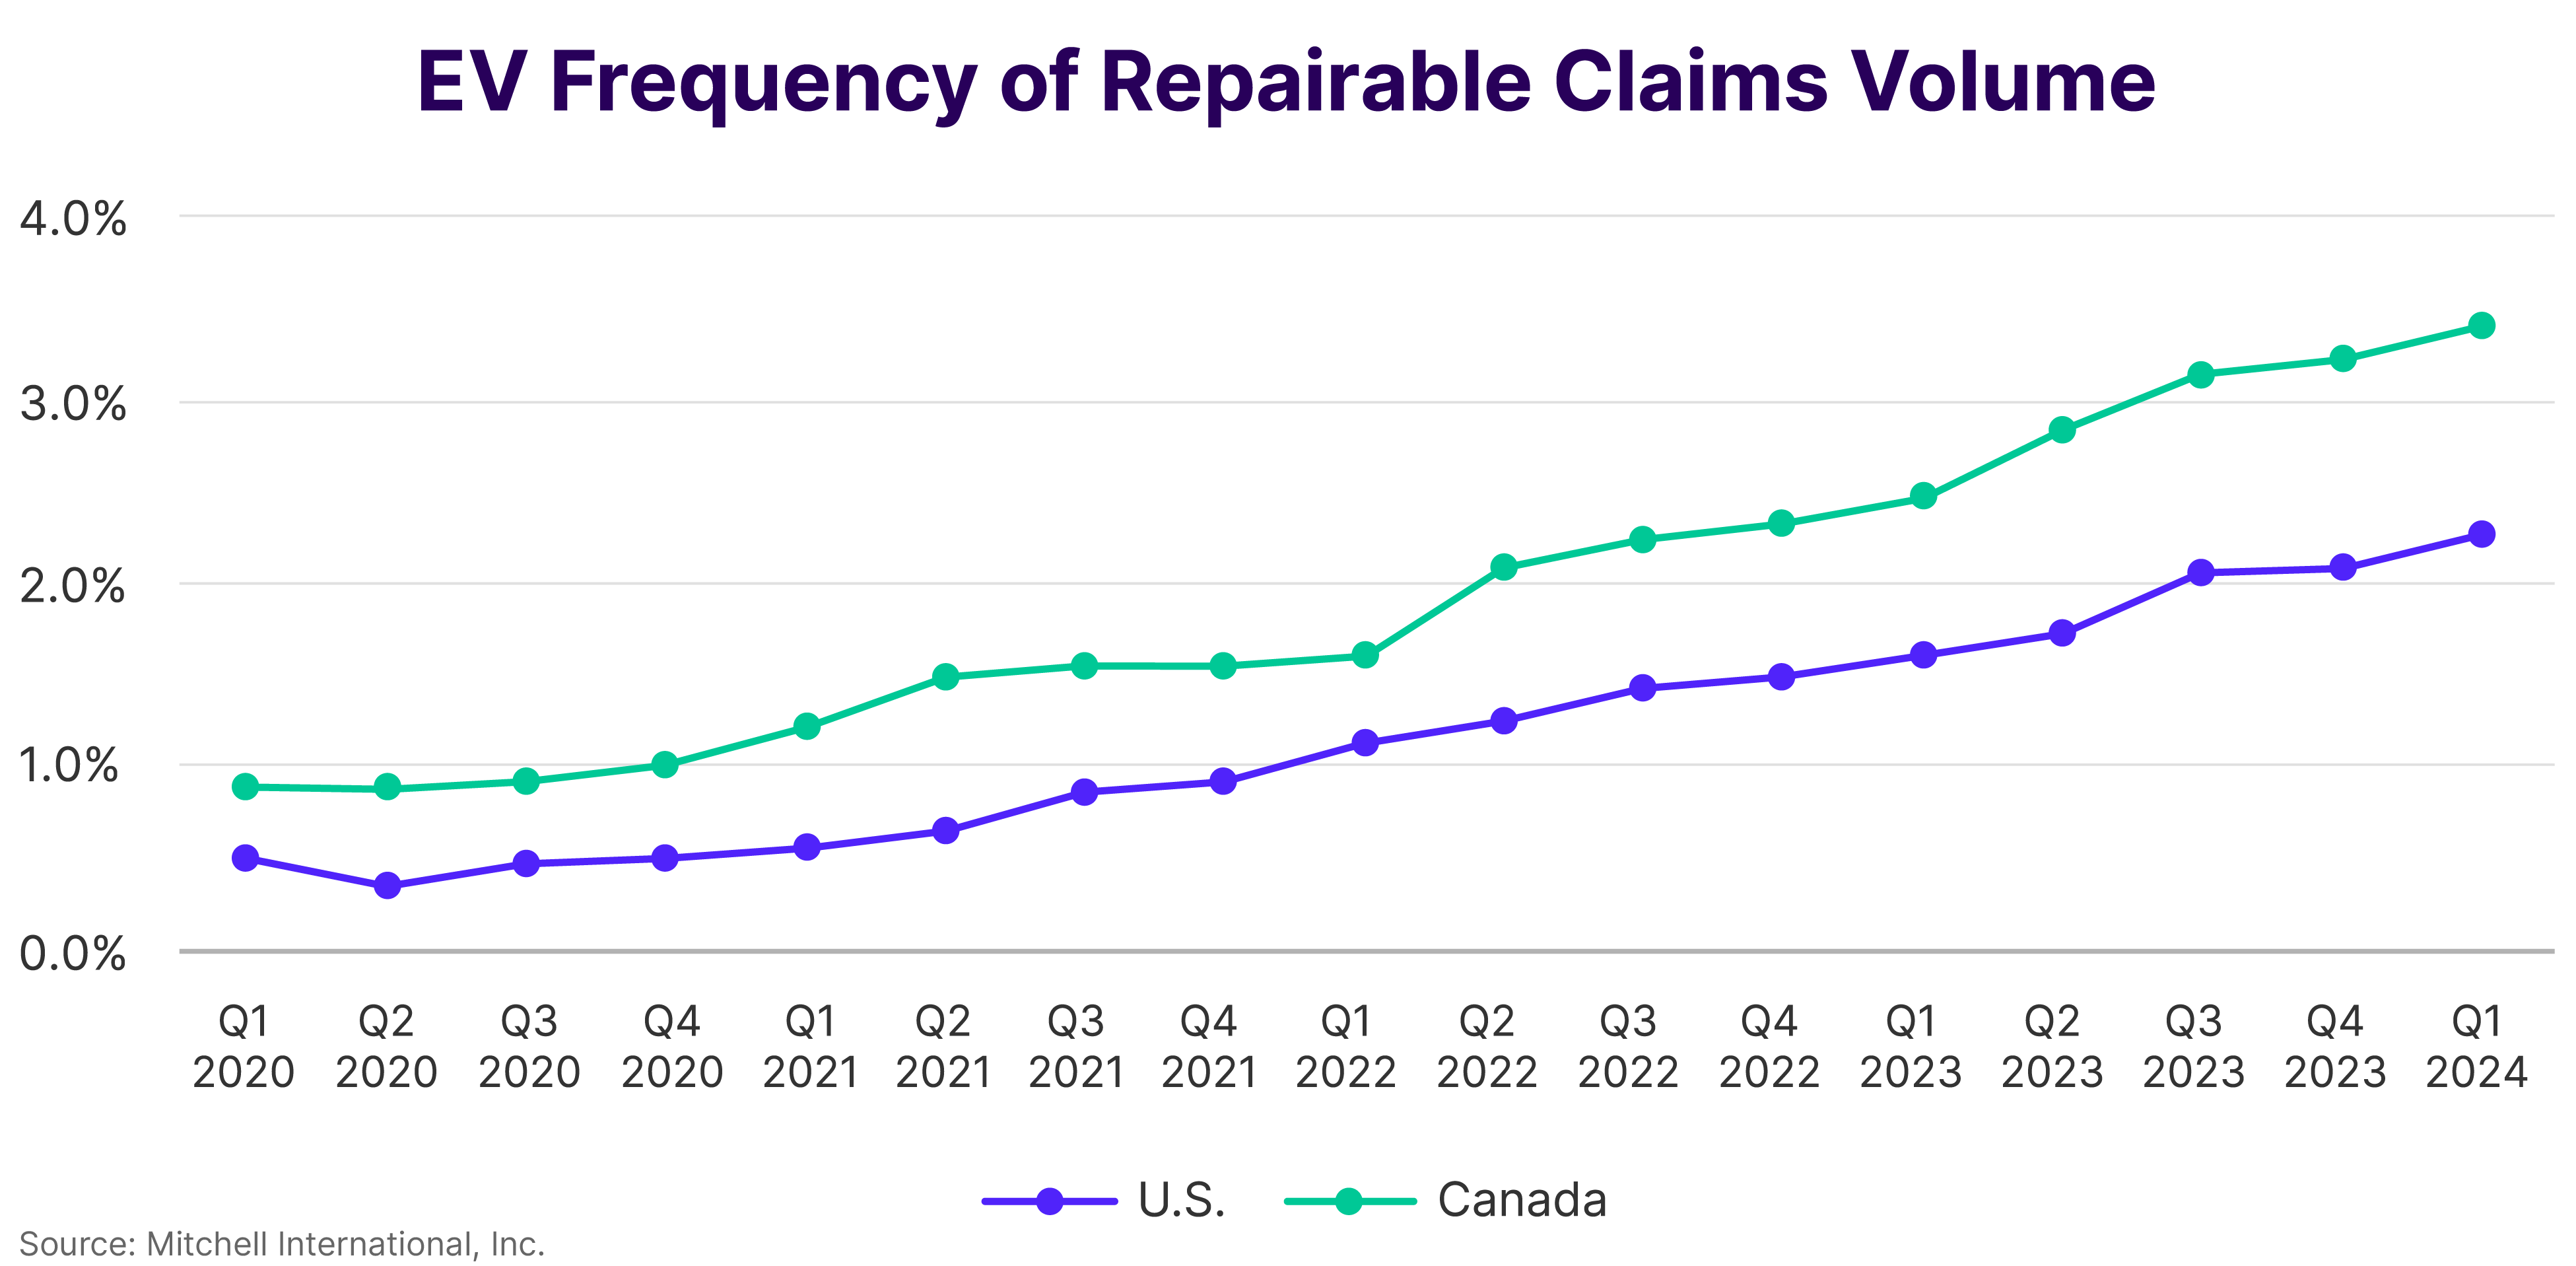 EV Frequency of Repairable Claims Volume Q1 2024